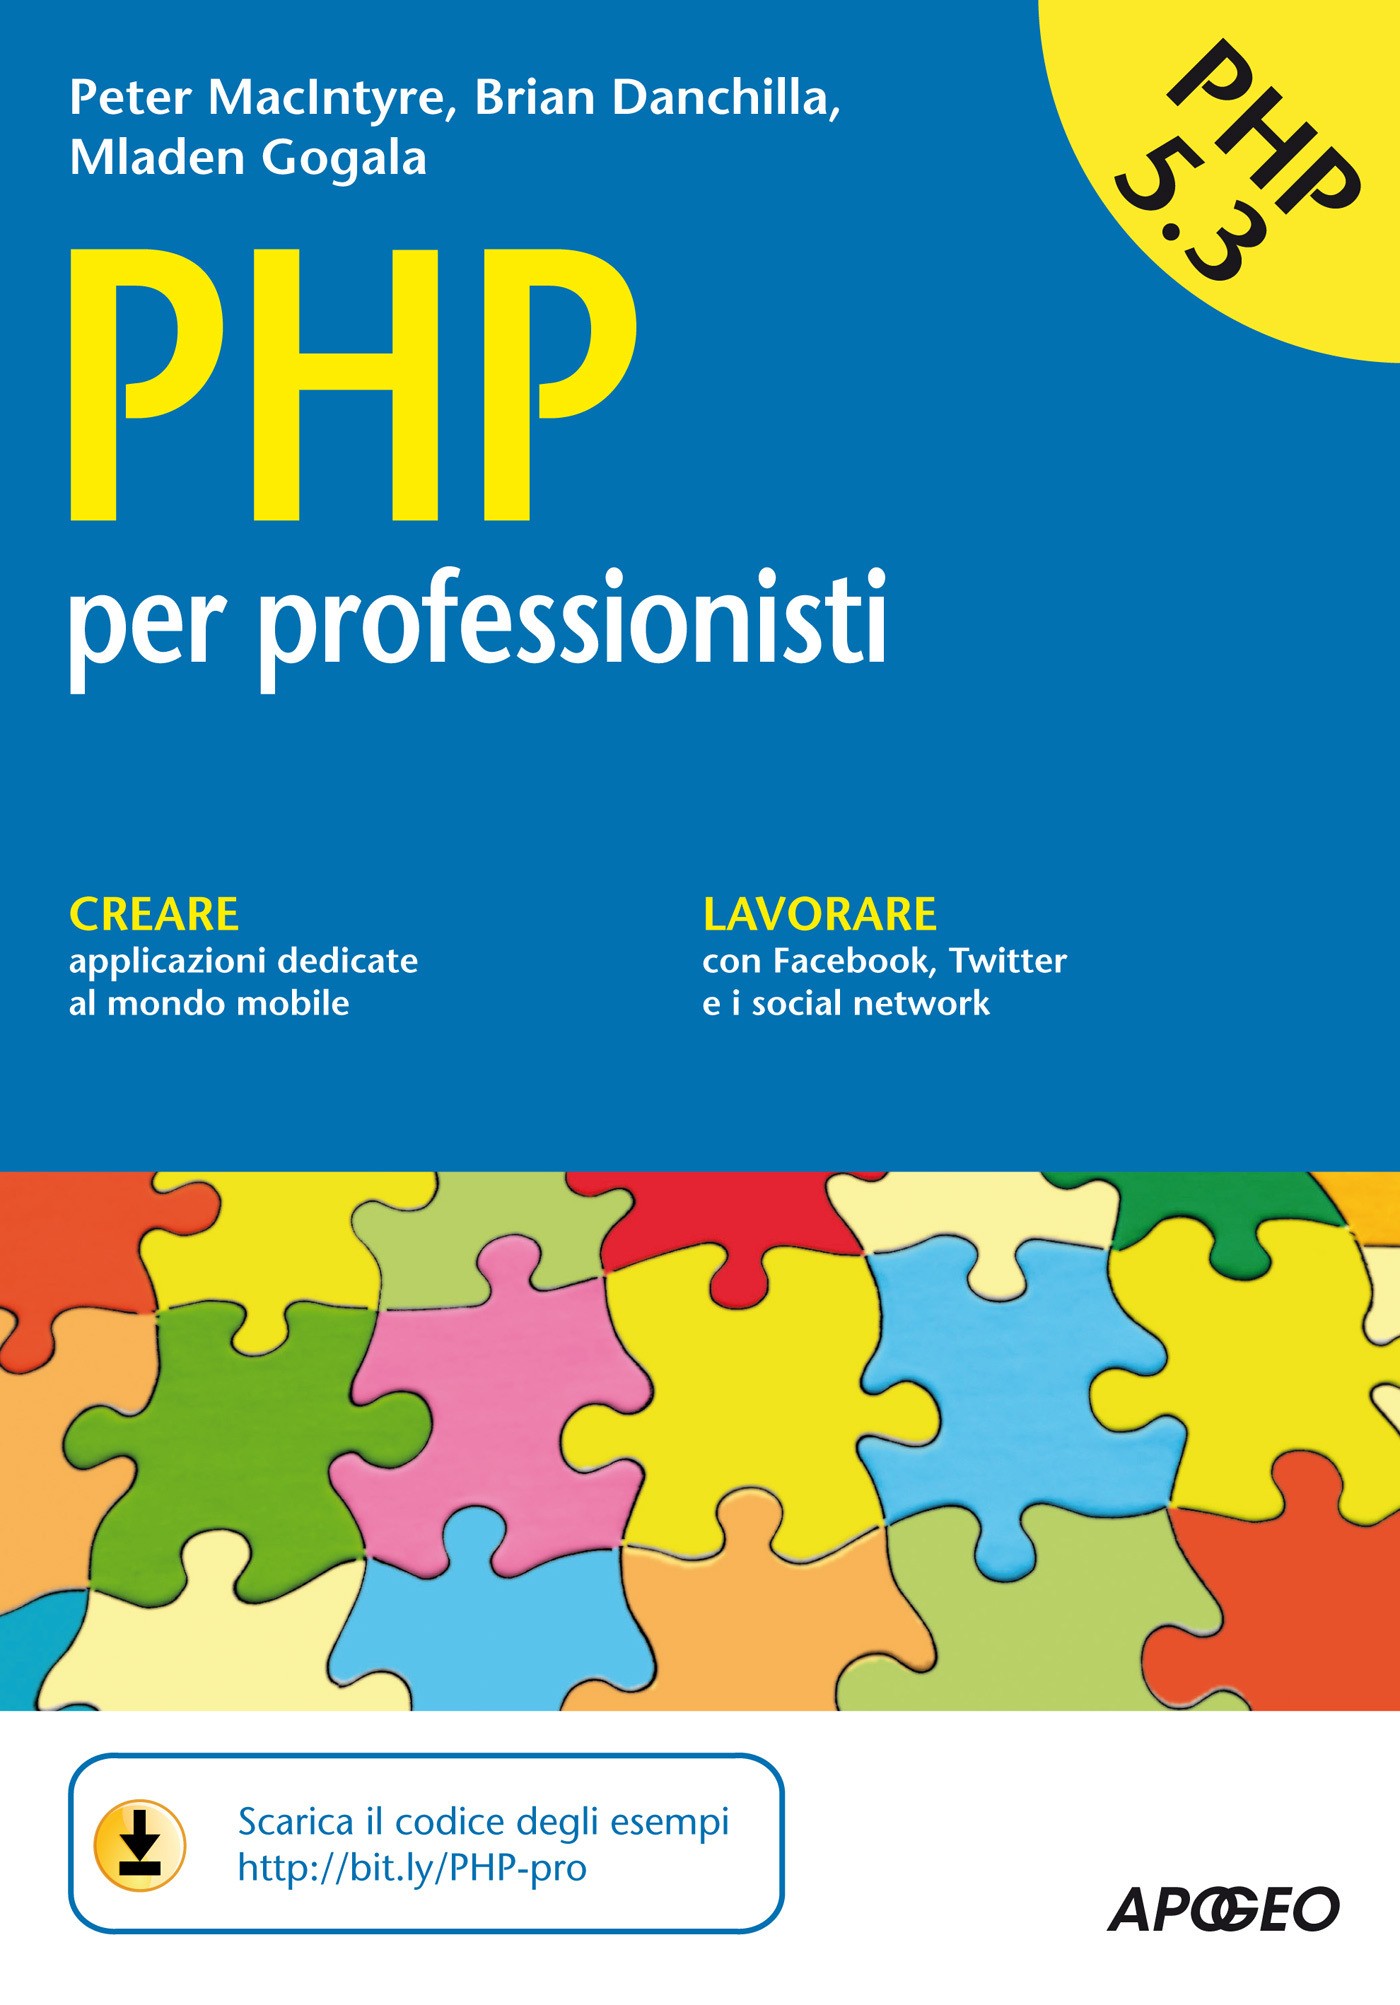 PHP - Librerie.coop